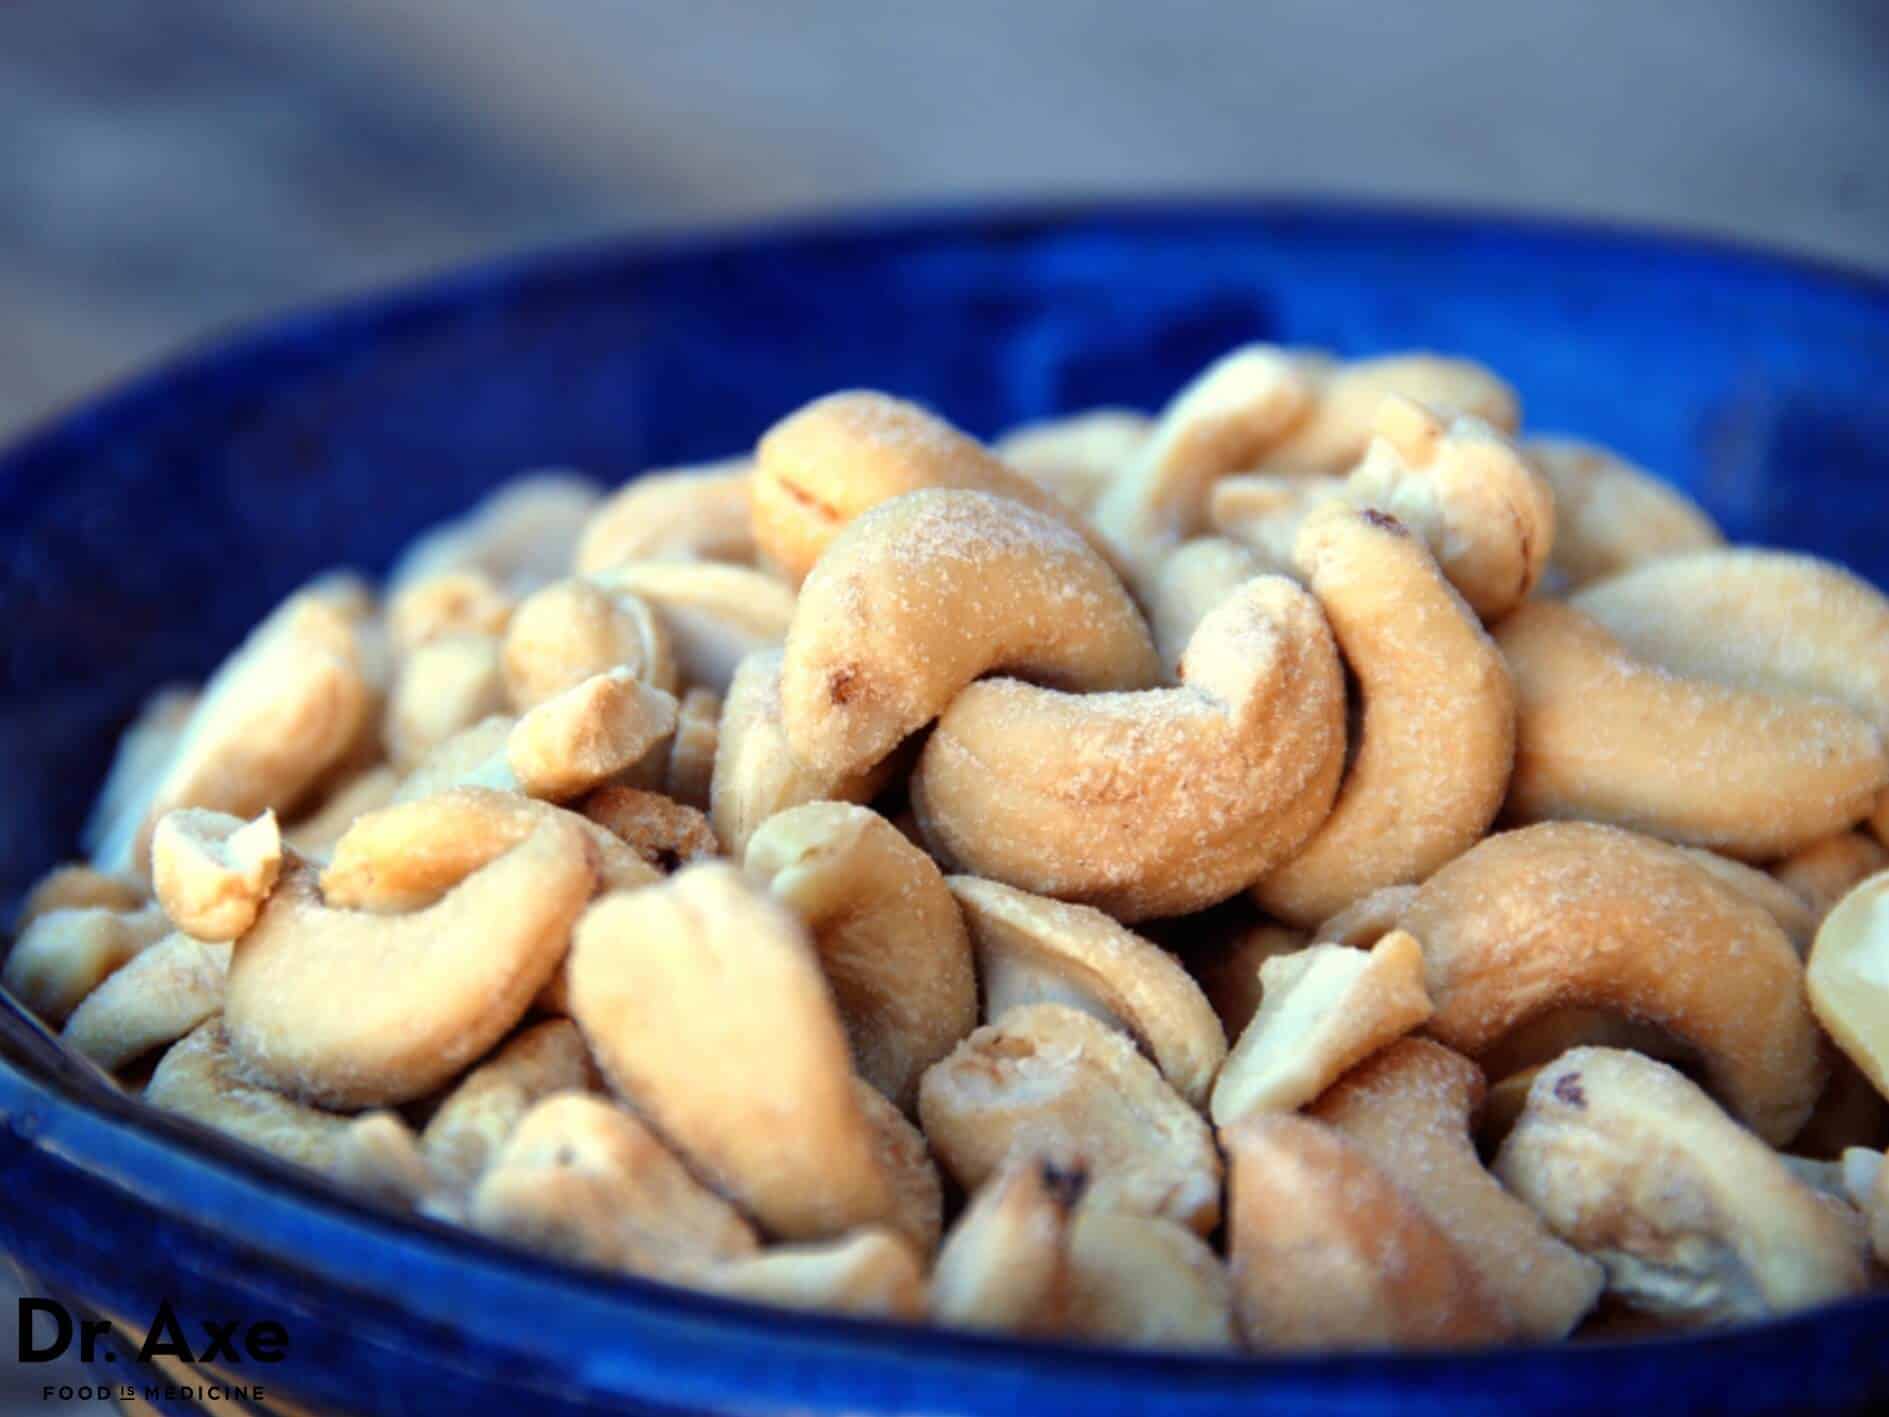 Salty lime roasted nuts recipe - Dr. Axe